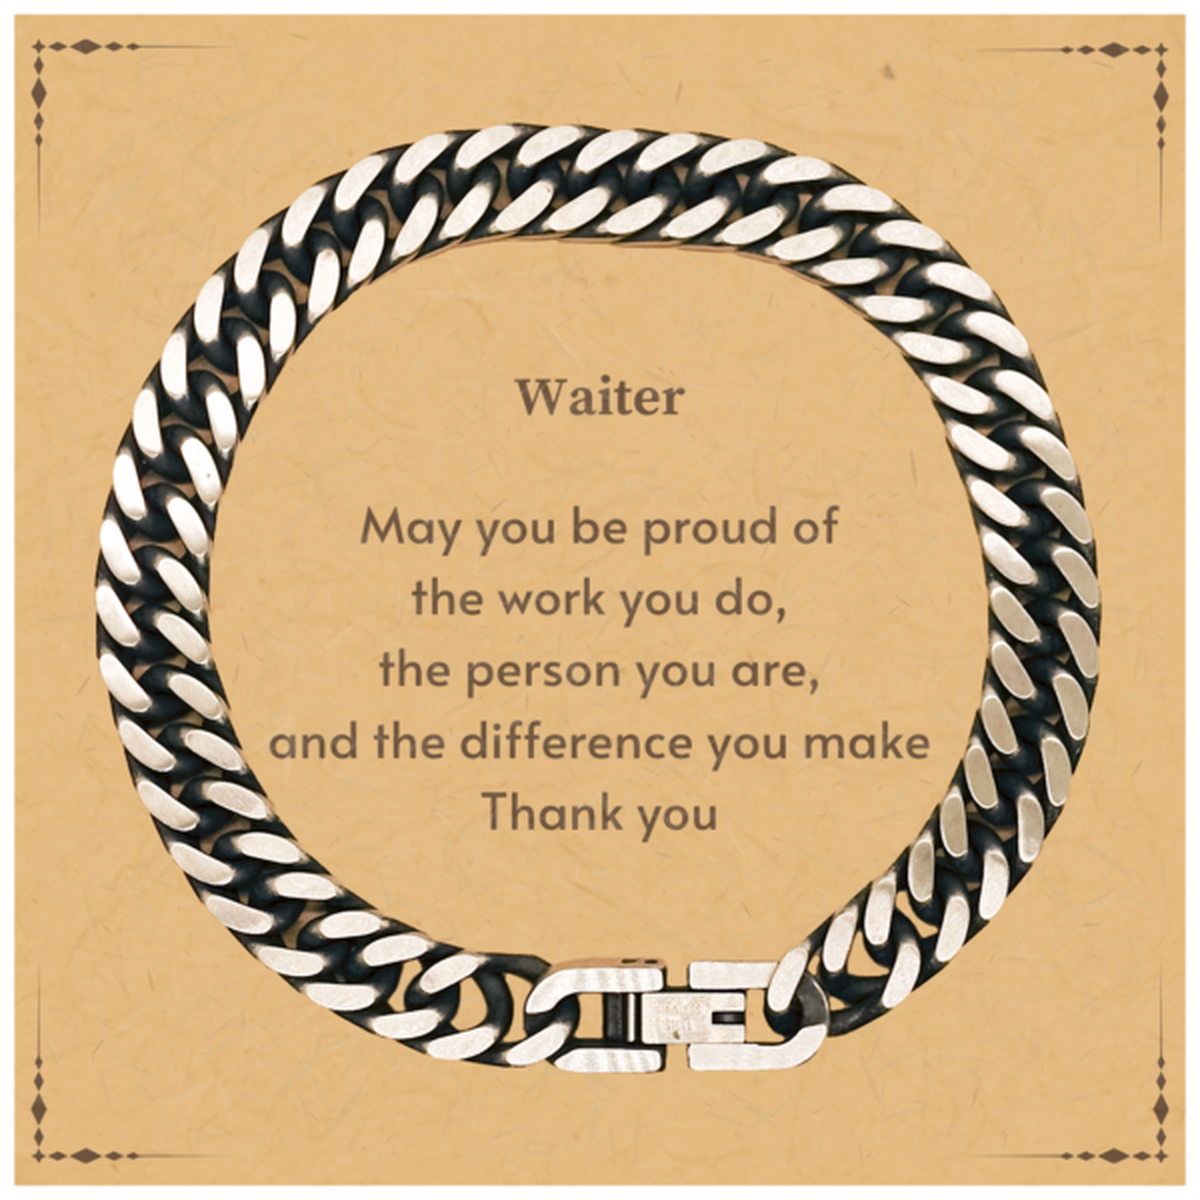 Heartwarming Cuban Link Chain Bracelet Retirement Coworkers Gifts for Waiter, Waiter May You be proud of the work you do, the person you are Gifts for Boss Men Women Friends